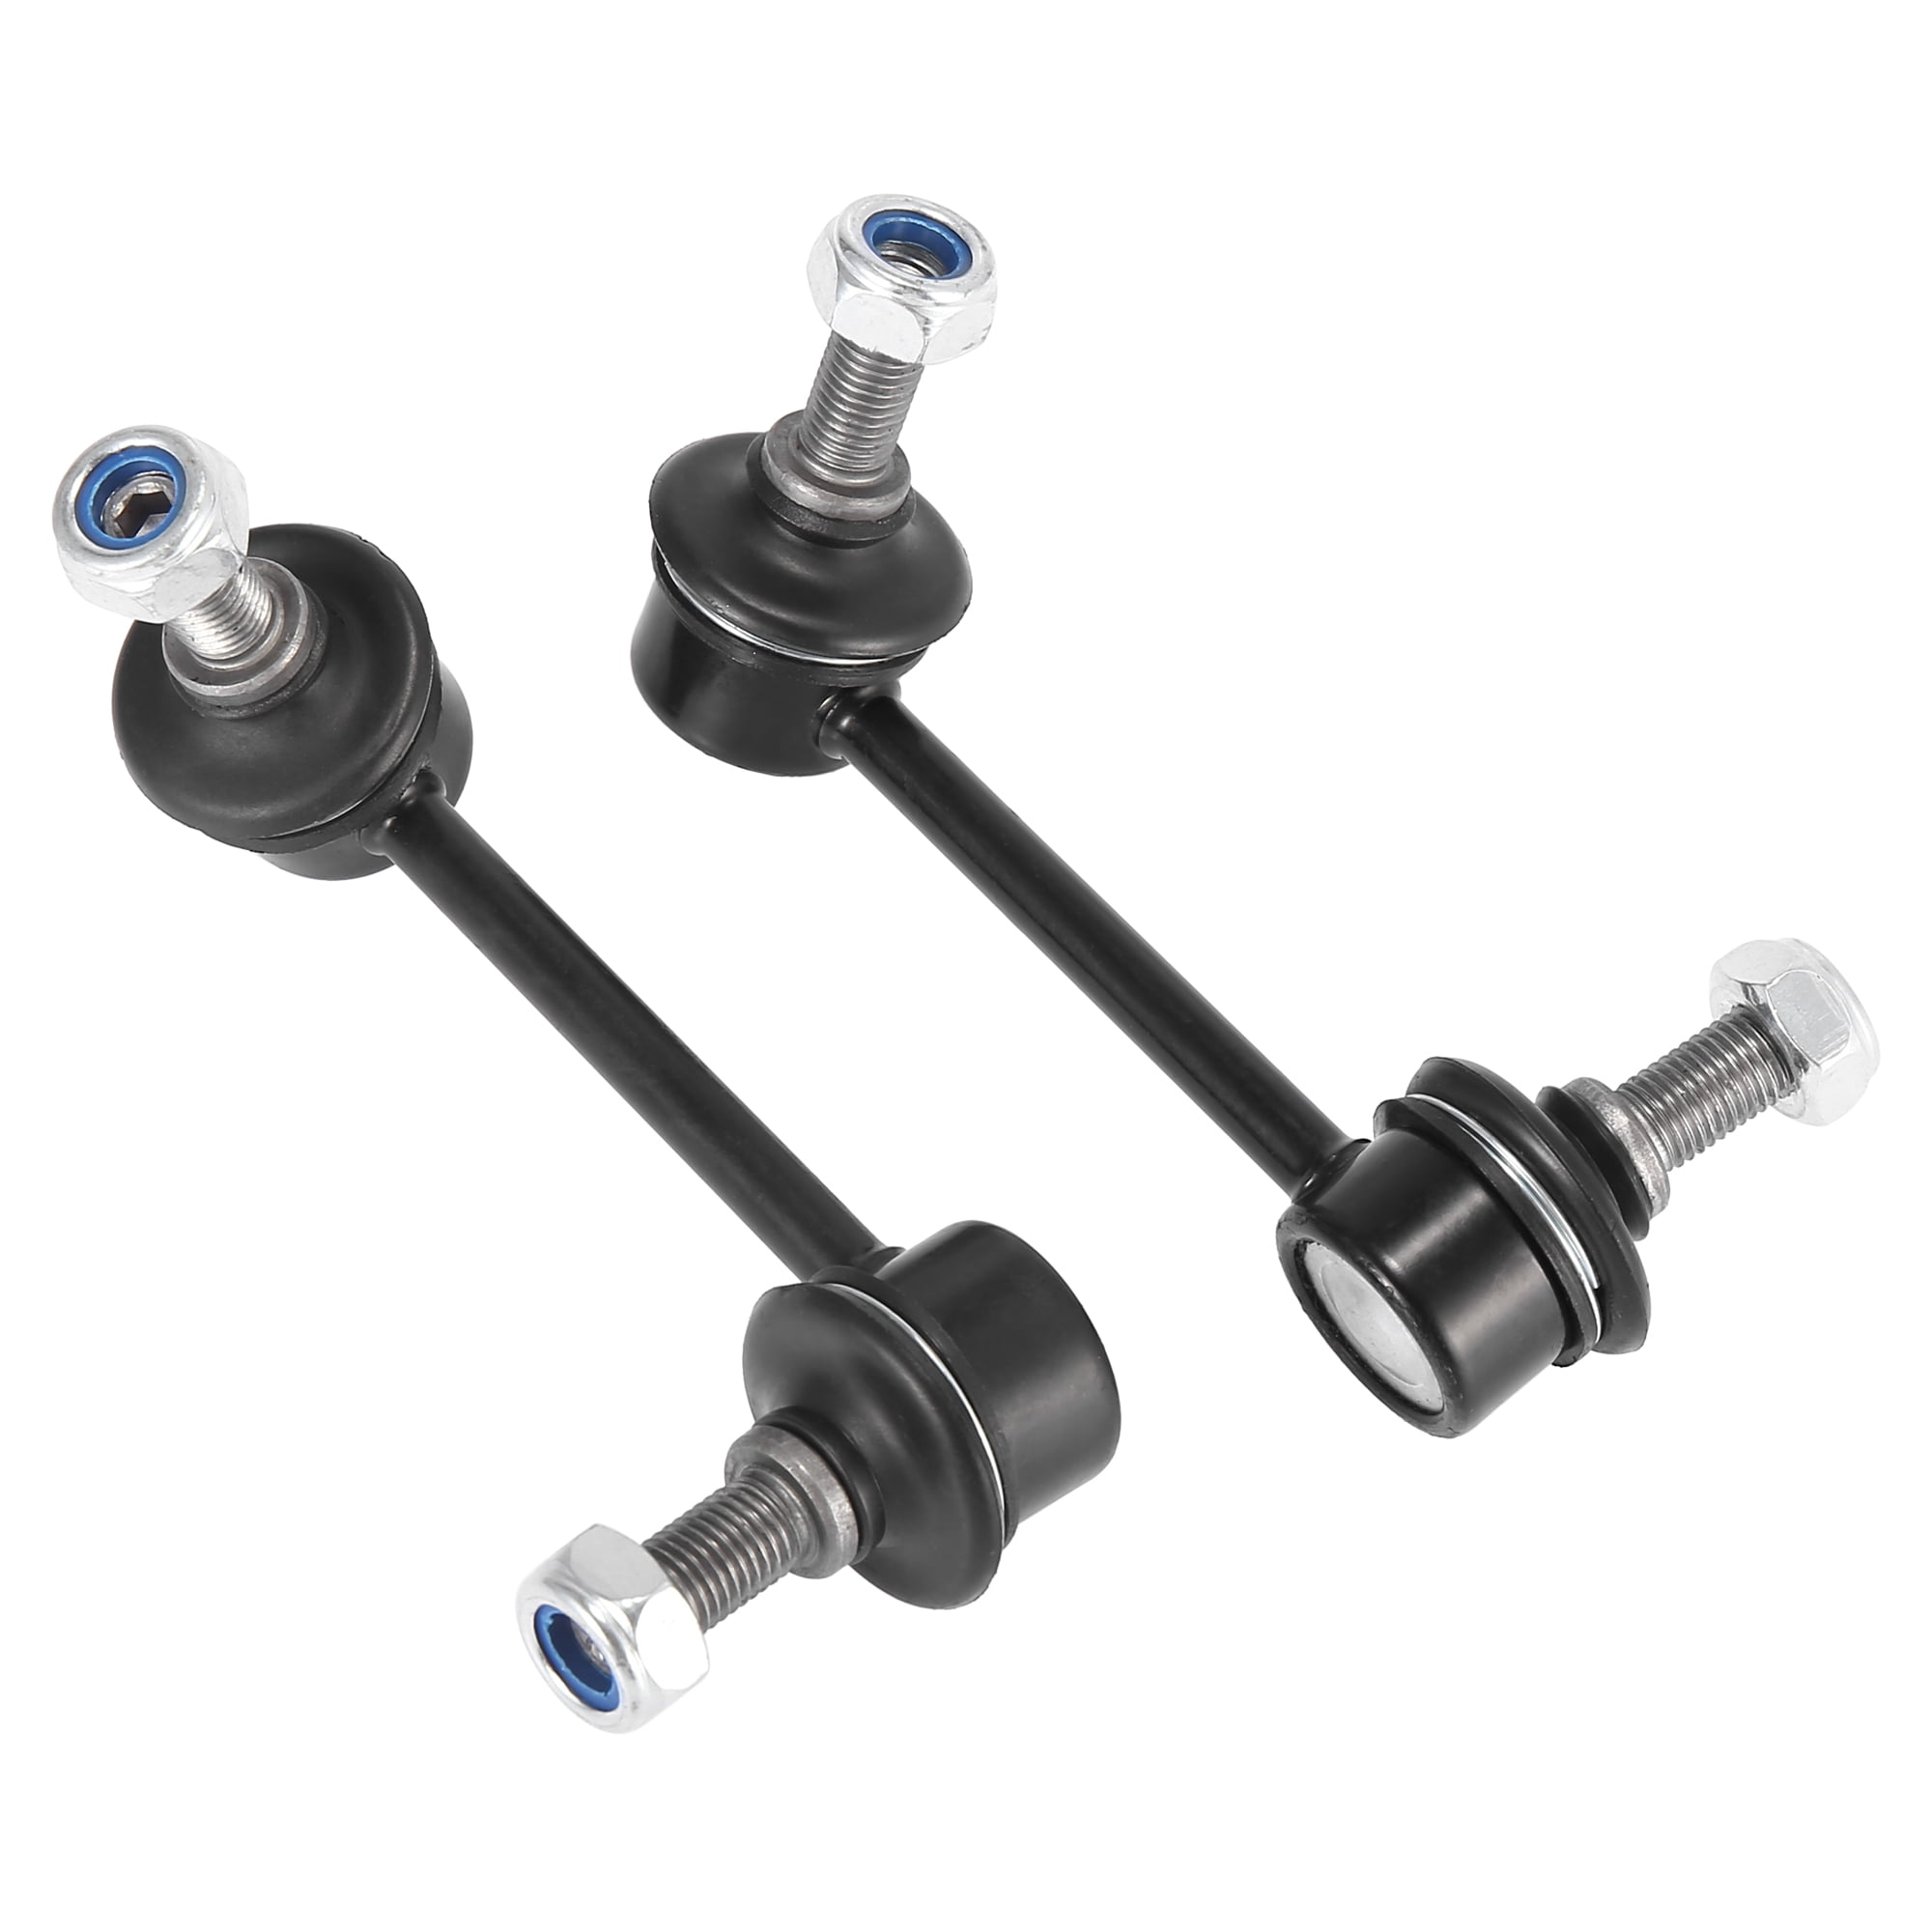 Suspension Dudes New 4PC Front & Rear Stabilizer/Sway Bar End Links for Nissan Altima Maxima 